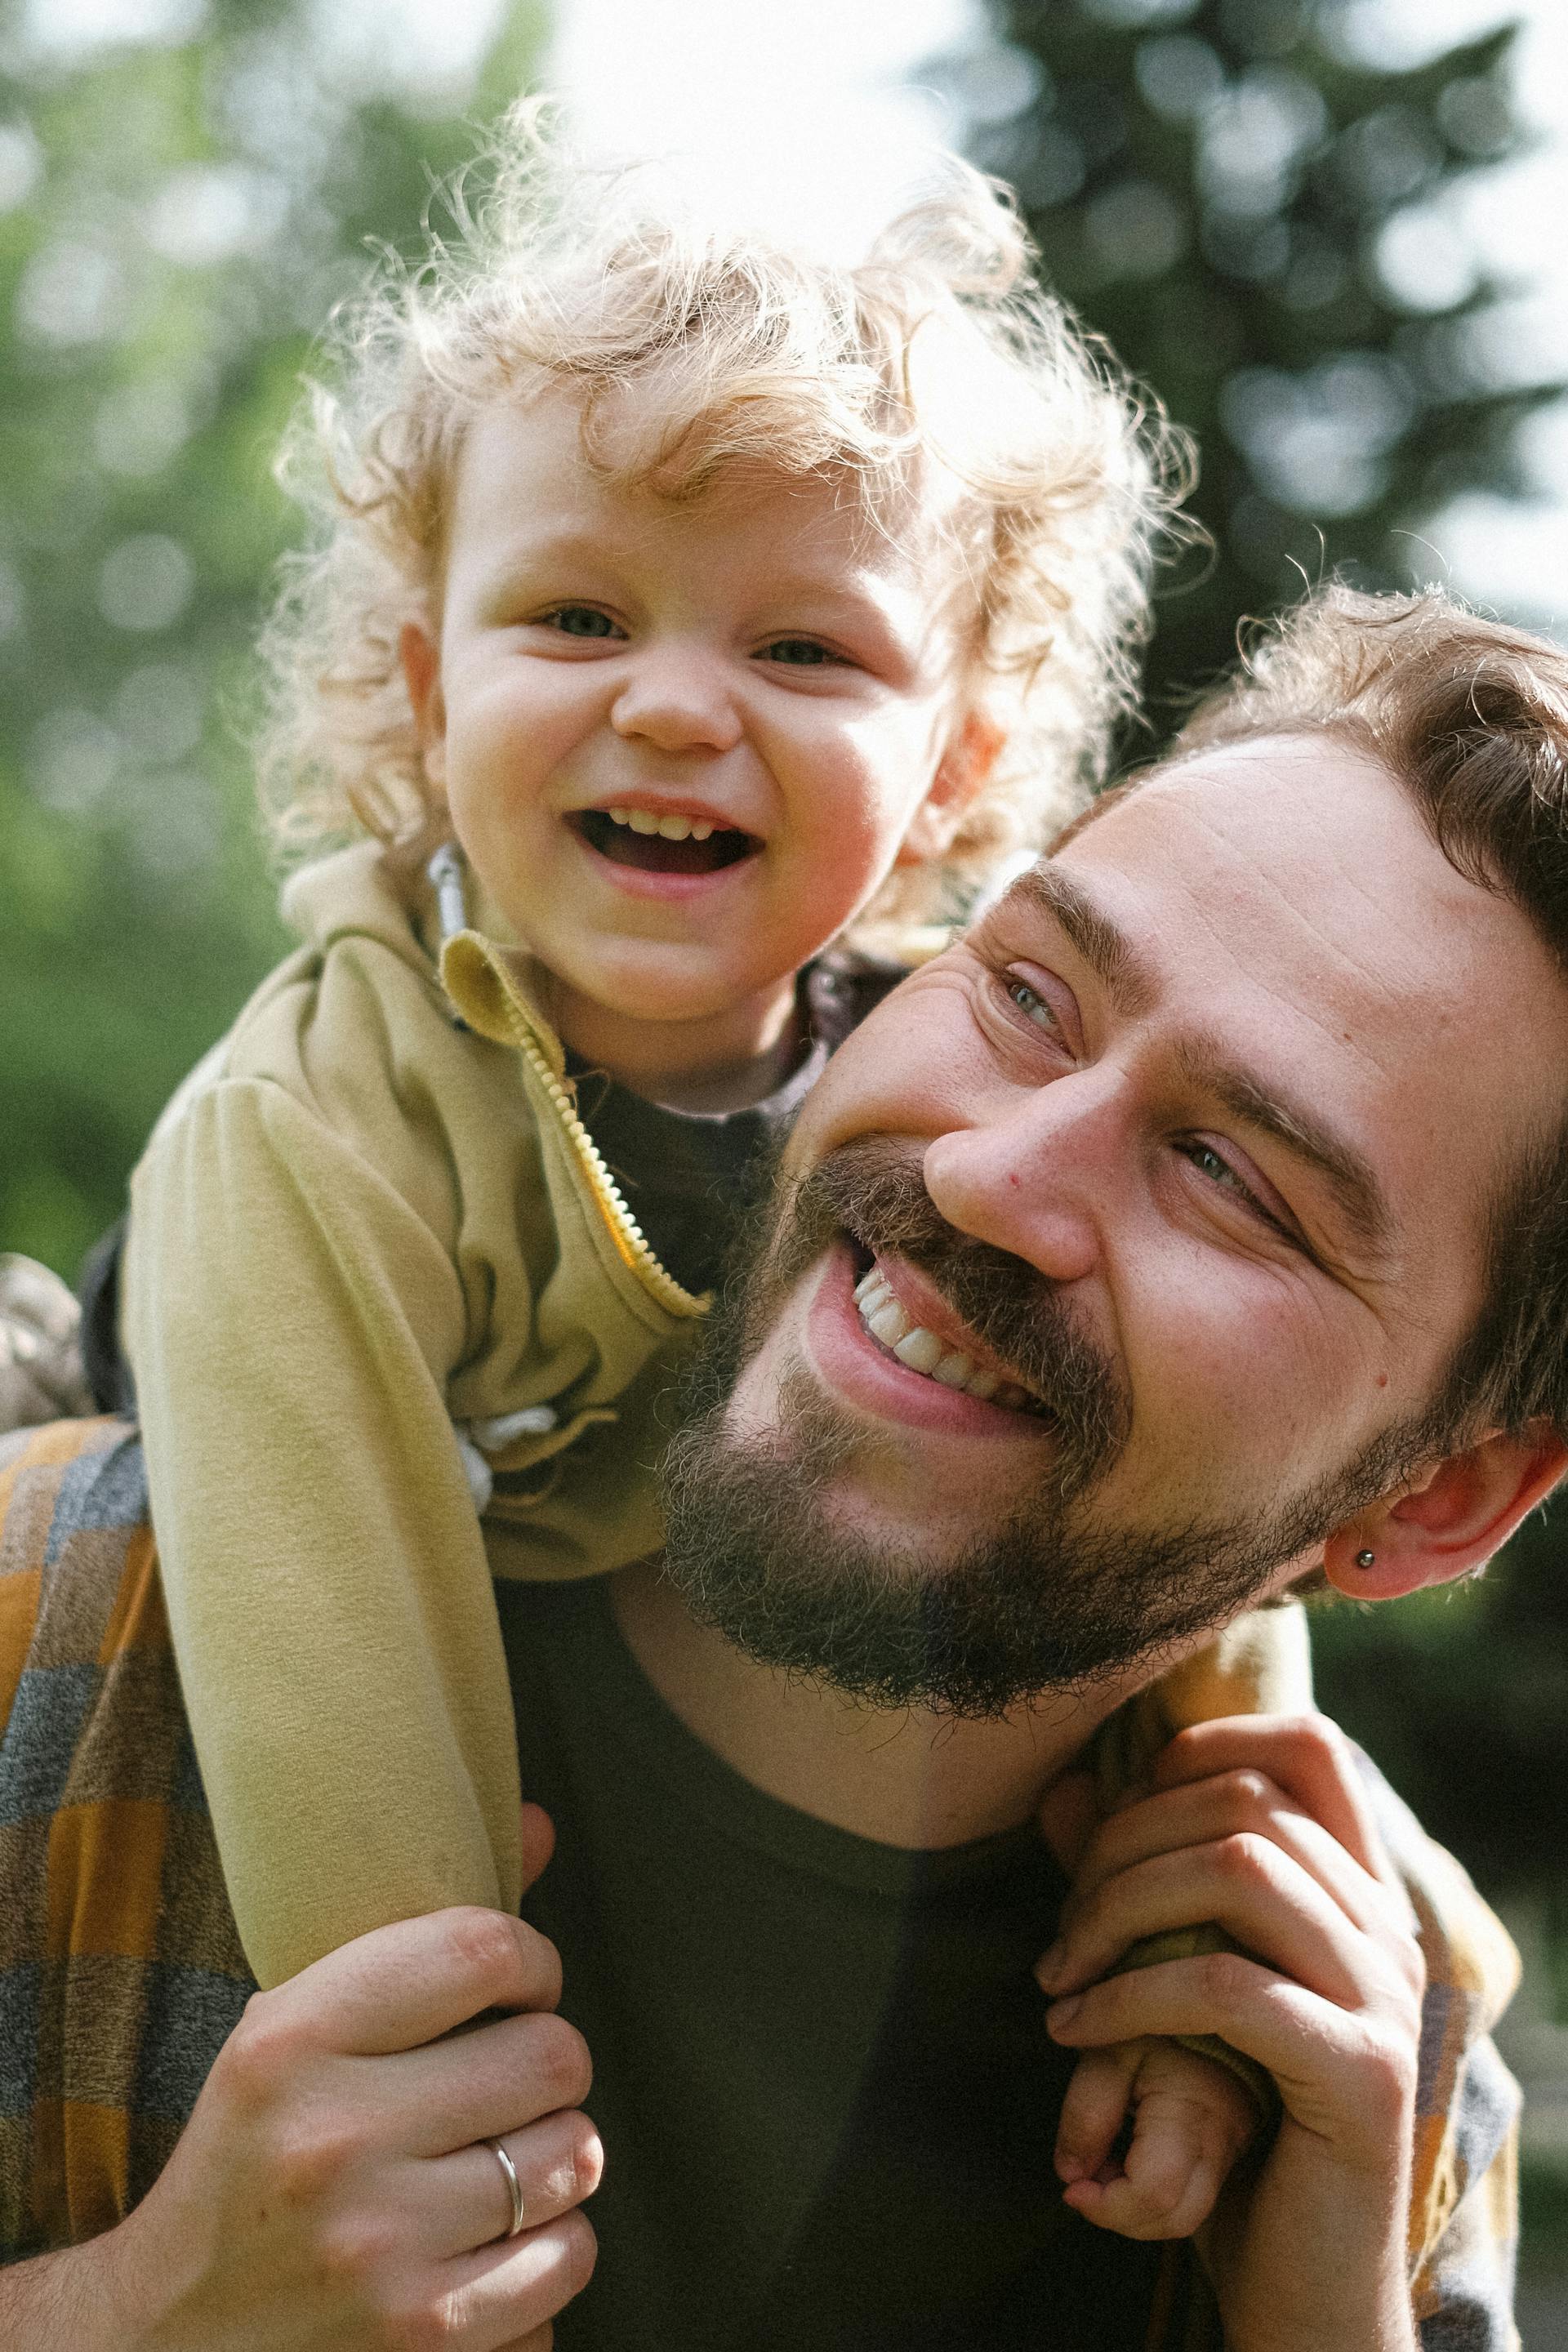 A man carrying his little boy on his shoulders | Source: Pexels